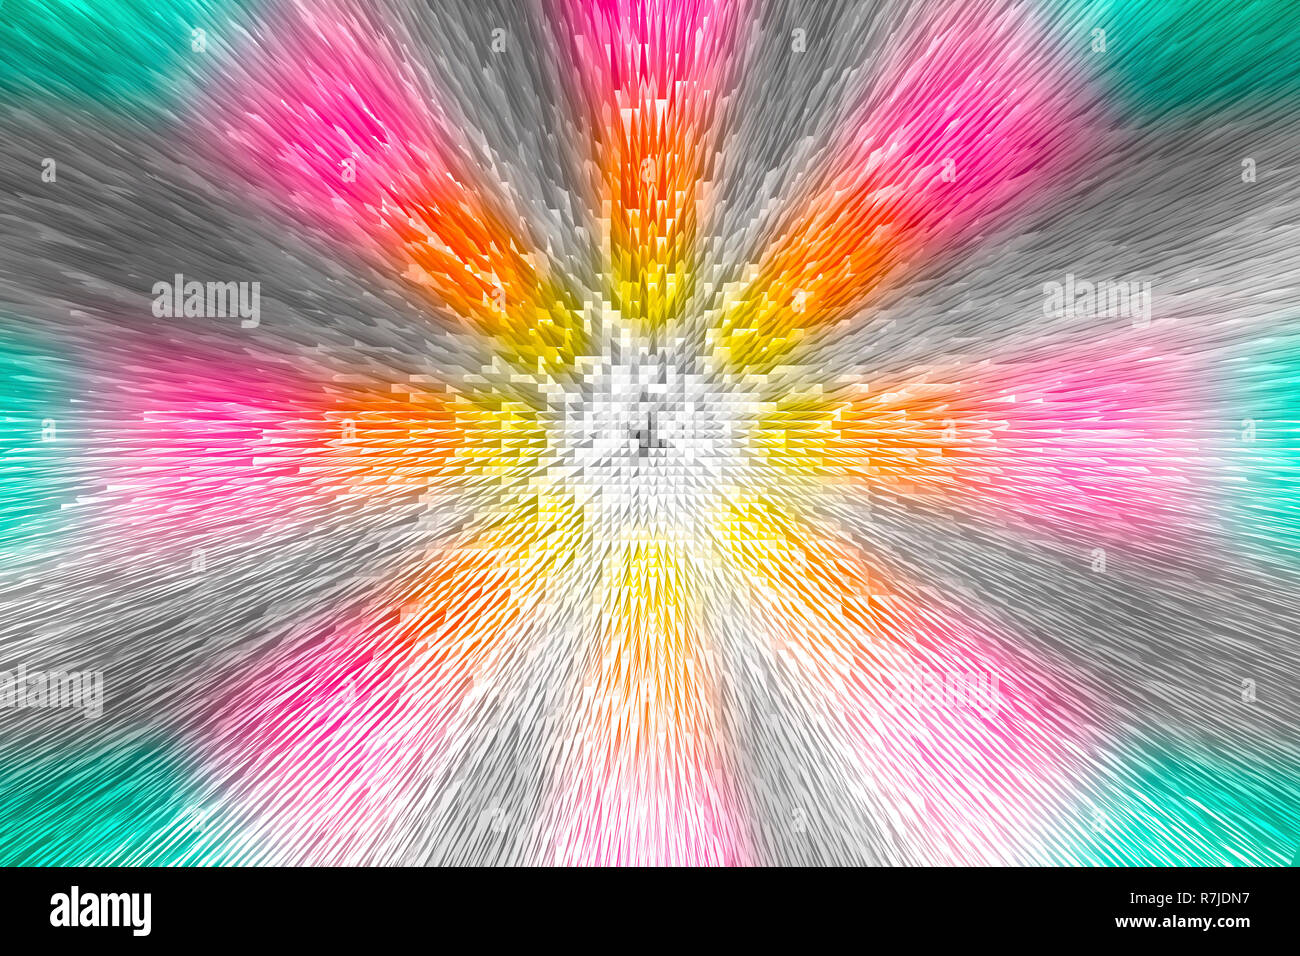 White, grey, blue, pink, orange and yellow radial pattern with effect Stock Photo